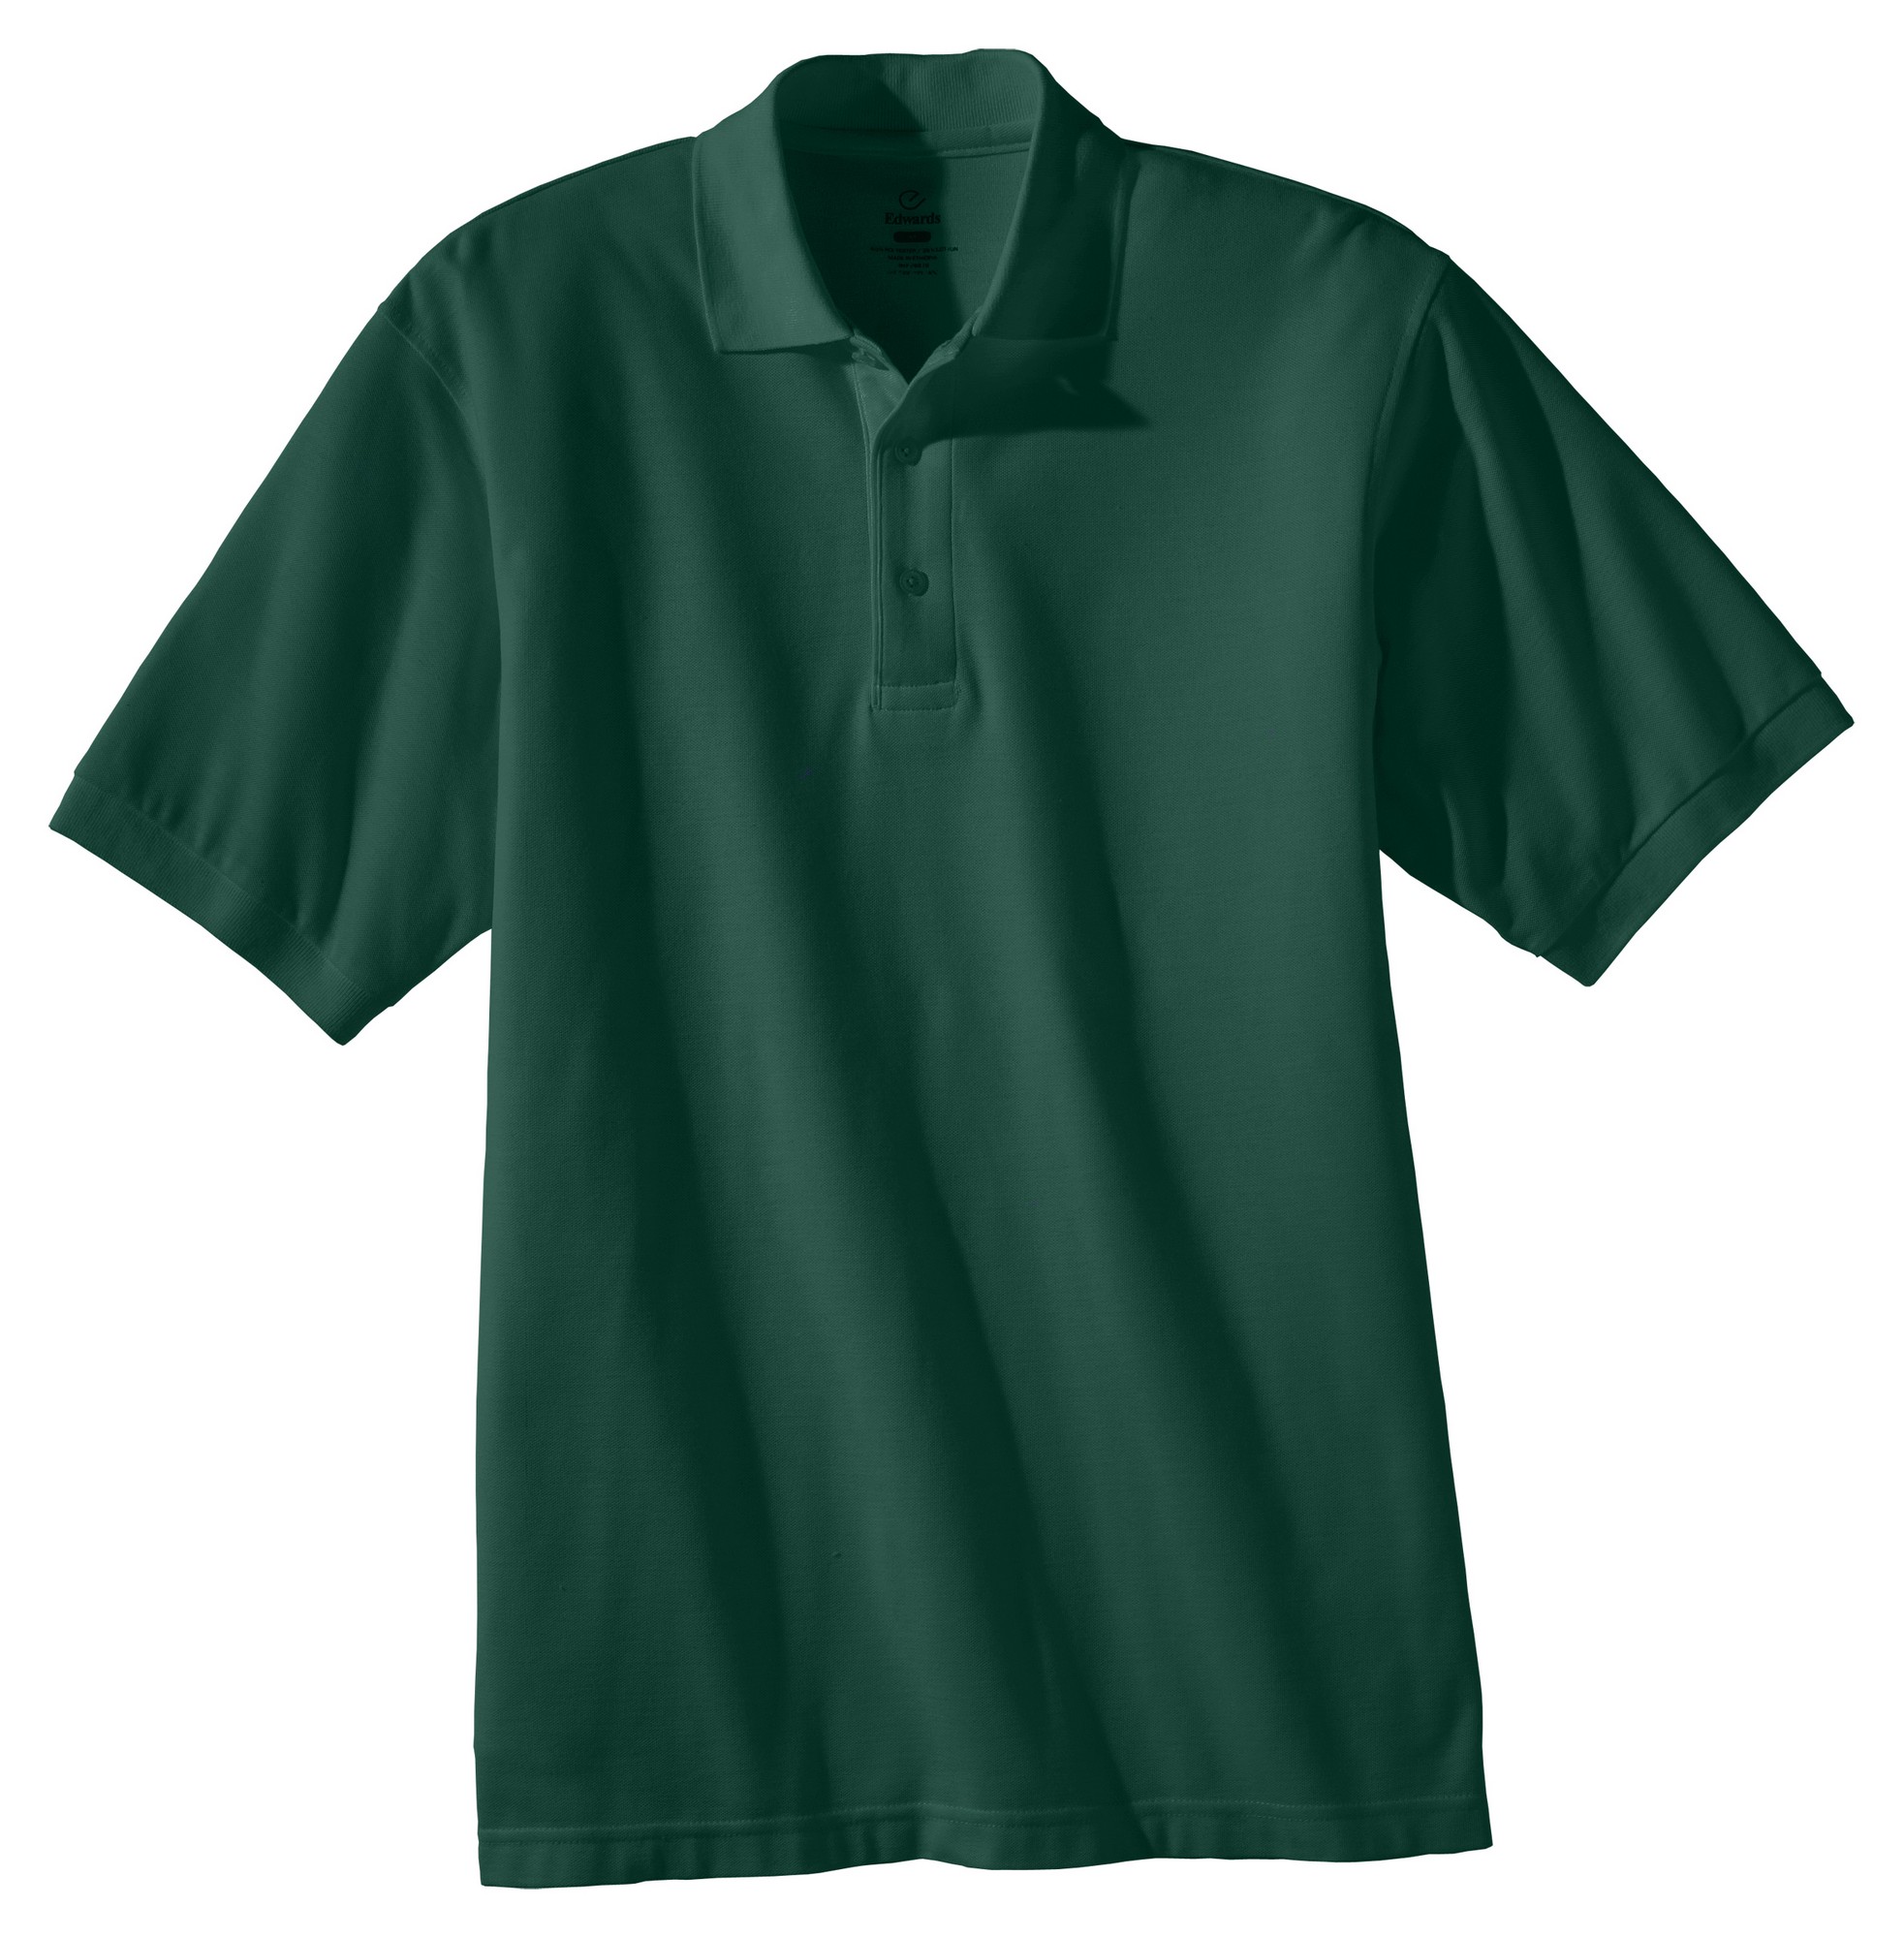 Men's Short Sleeve Soft Touch Blended Pique Polo